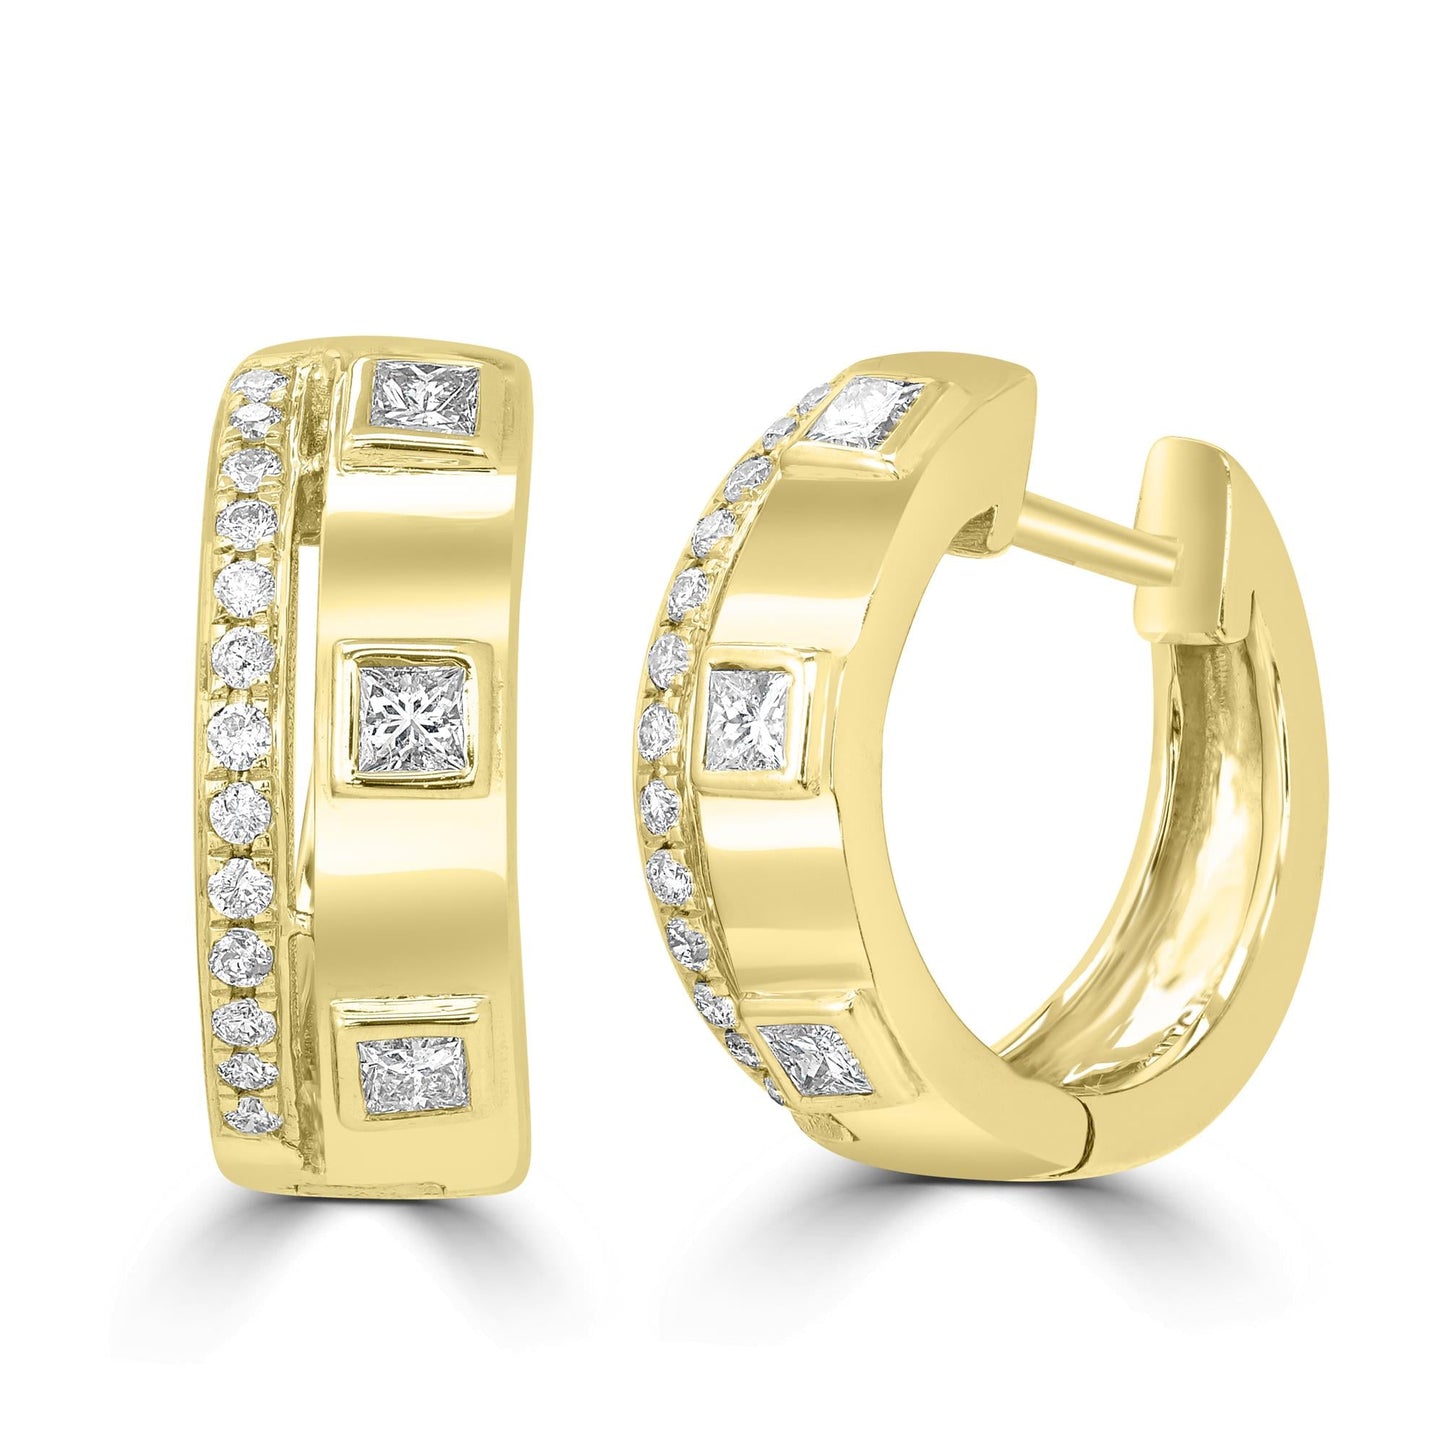 14K Yellow Gold Hoop Earrings With Square and Round Diamonds